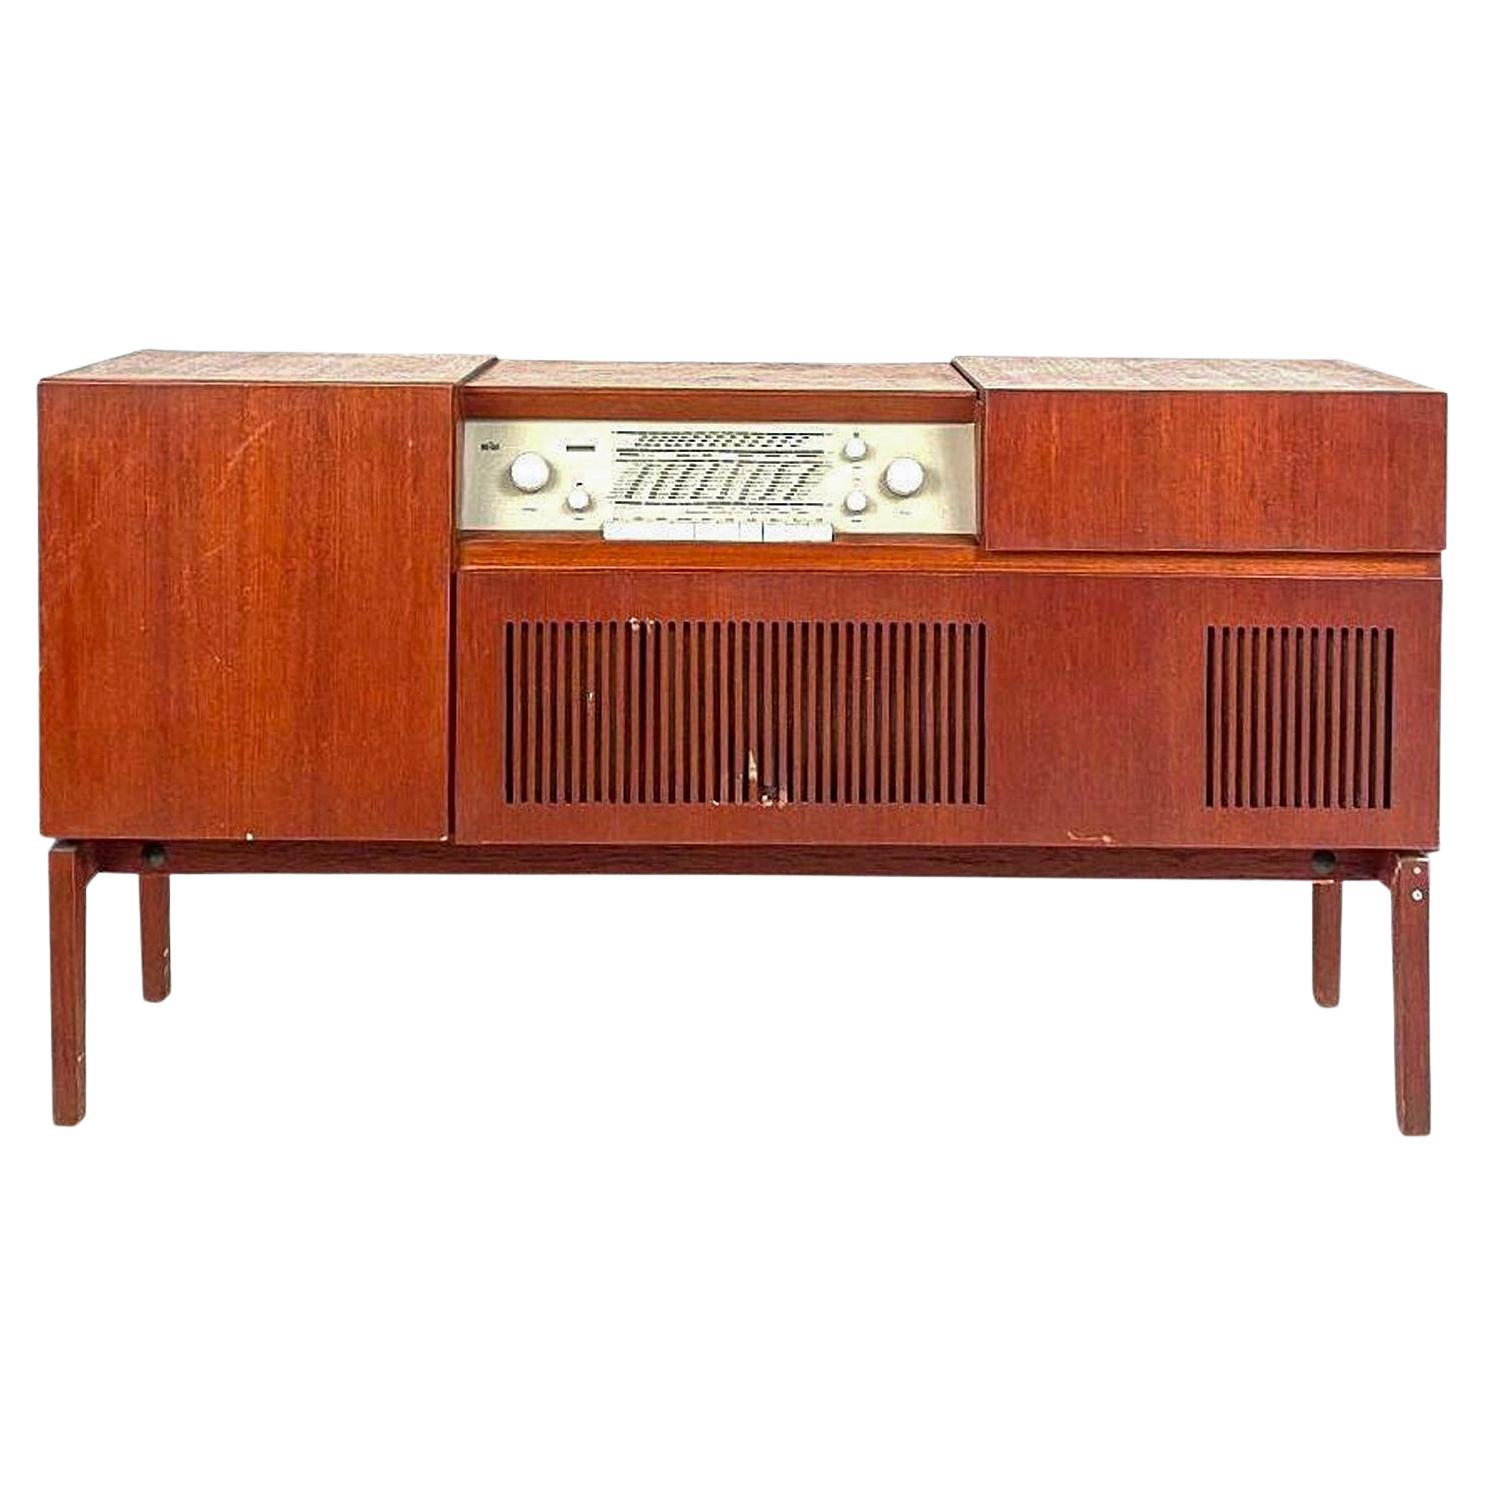 Model Hm 6-81 Teak Record Console by Herbert For Sale